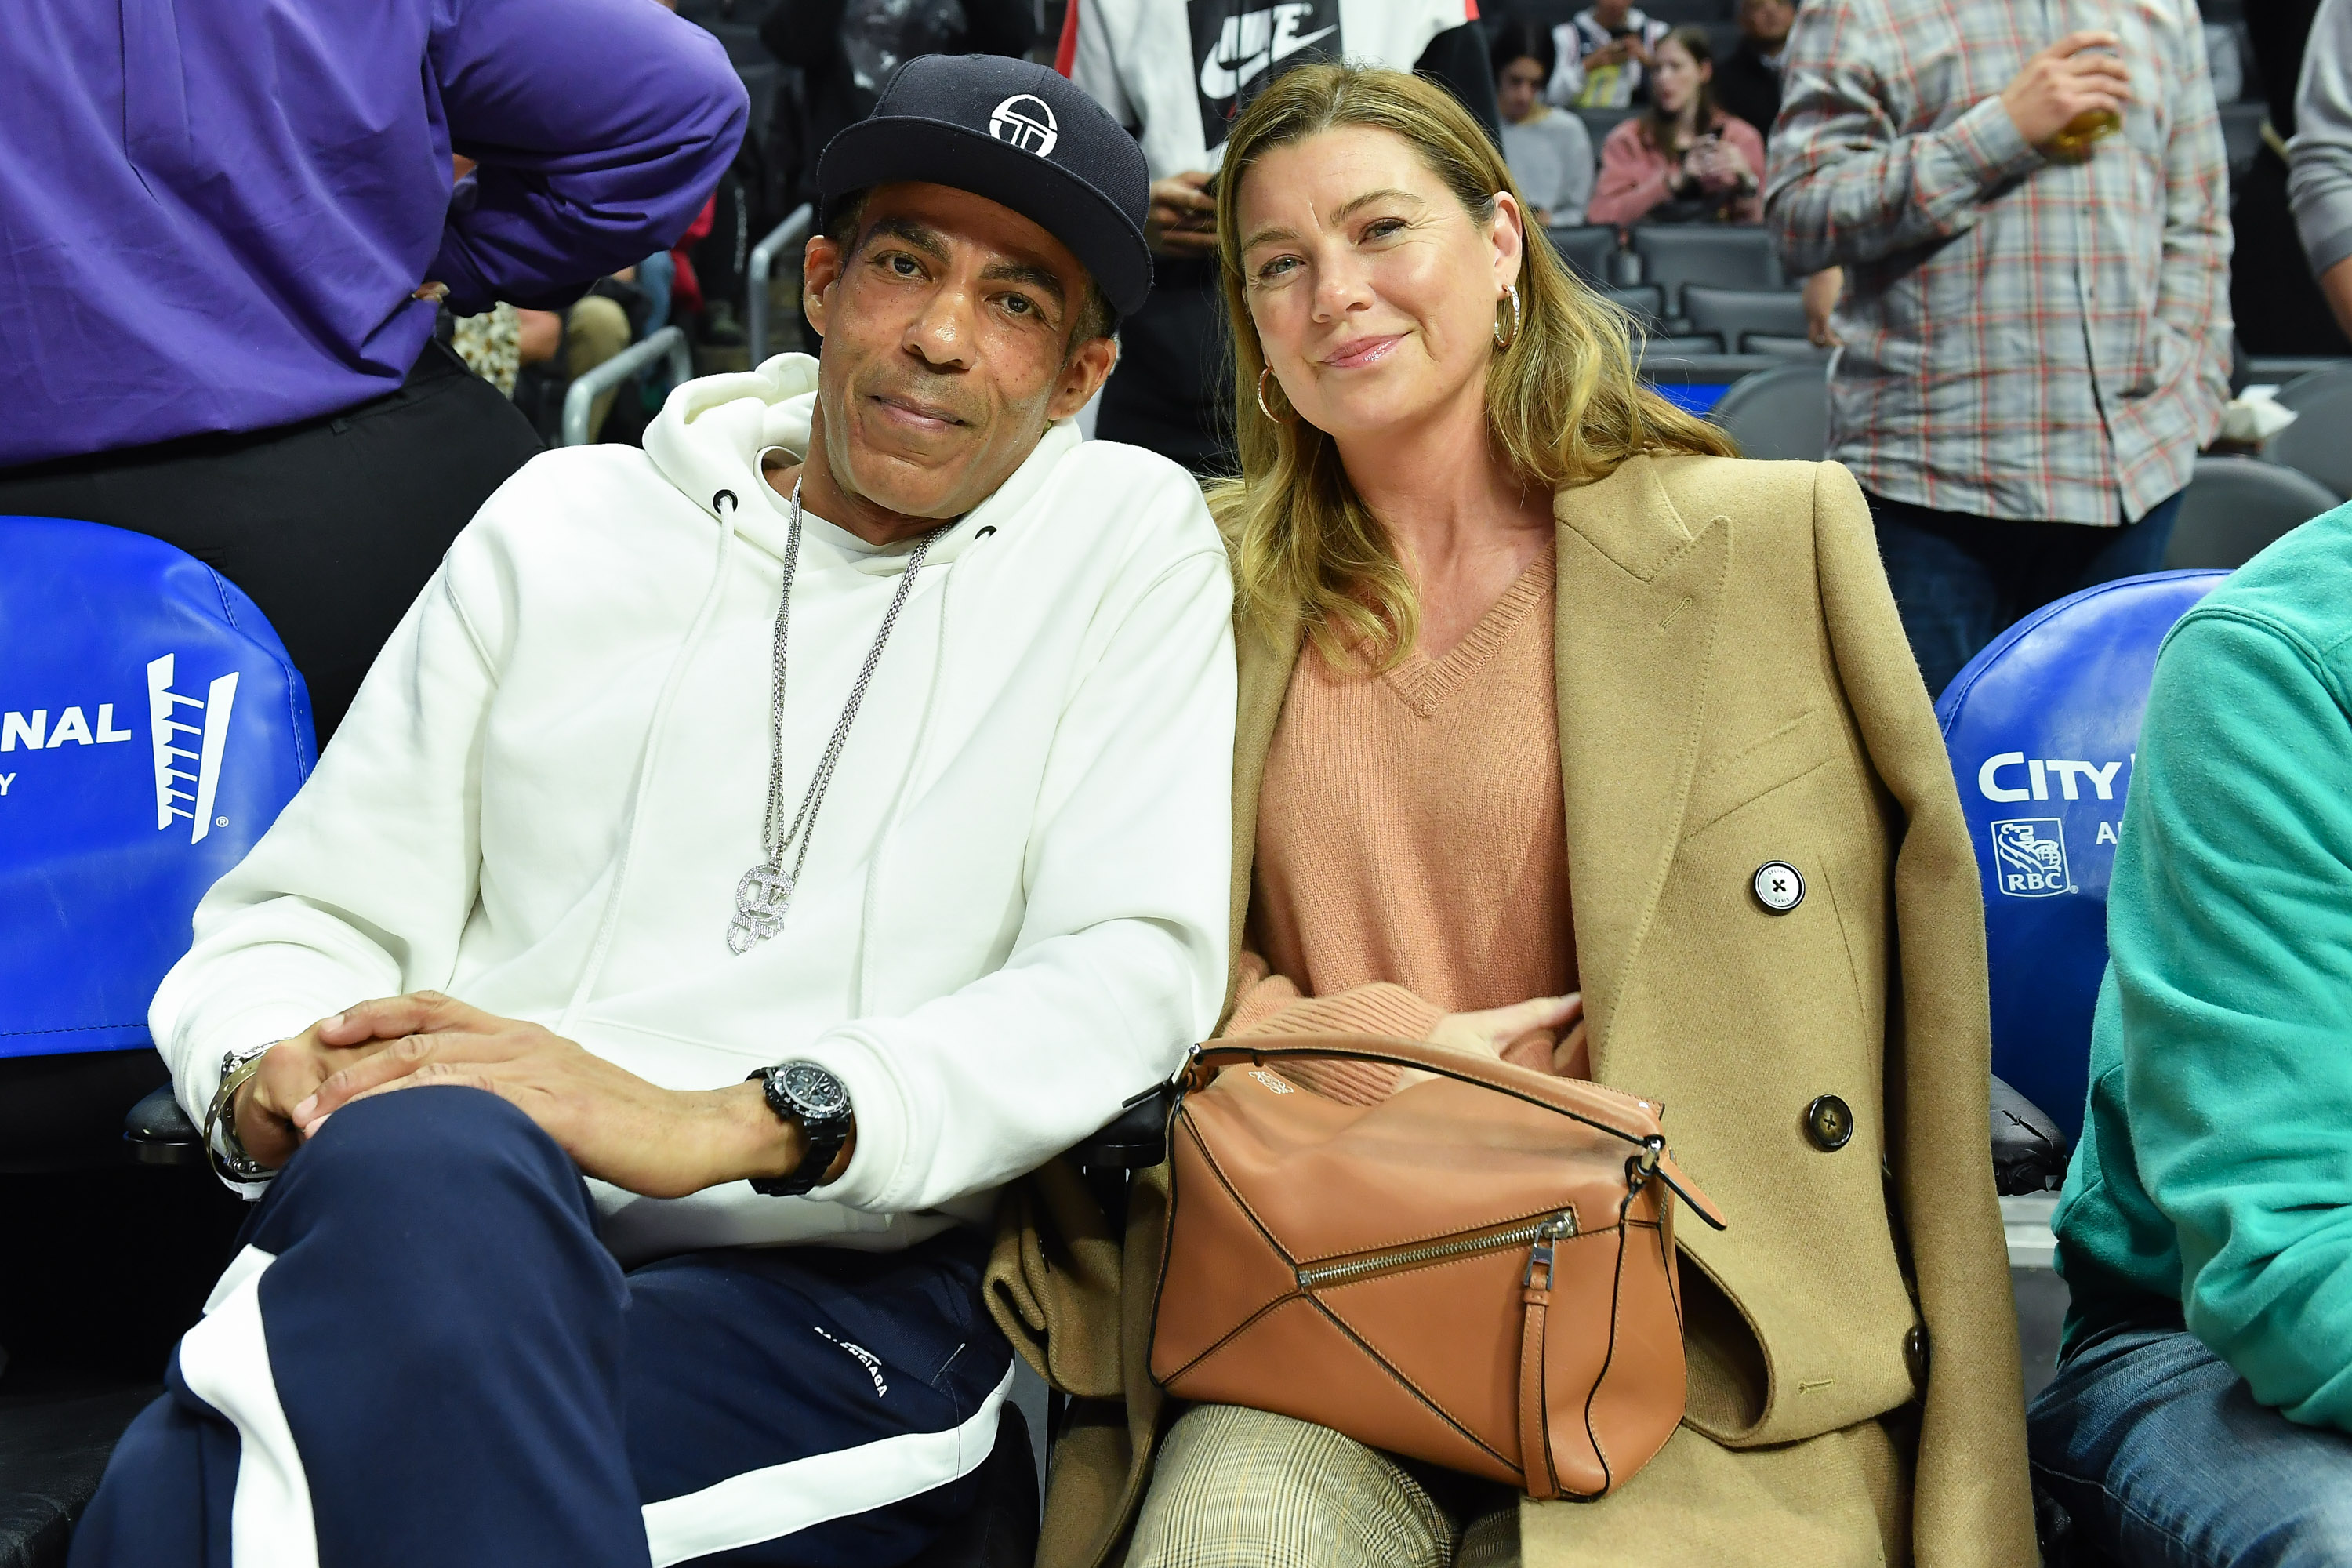 LOS ANGELES, CALIFORNIA - JANUARY 14: Chris Ivery and Ellen Pompeo attend a basketball game between the Los Angeles Clippers and Cleveland Cavaliers at Staples Center on January 14, 2020 in Los Angeles, California.